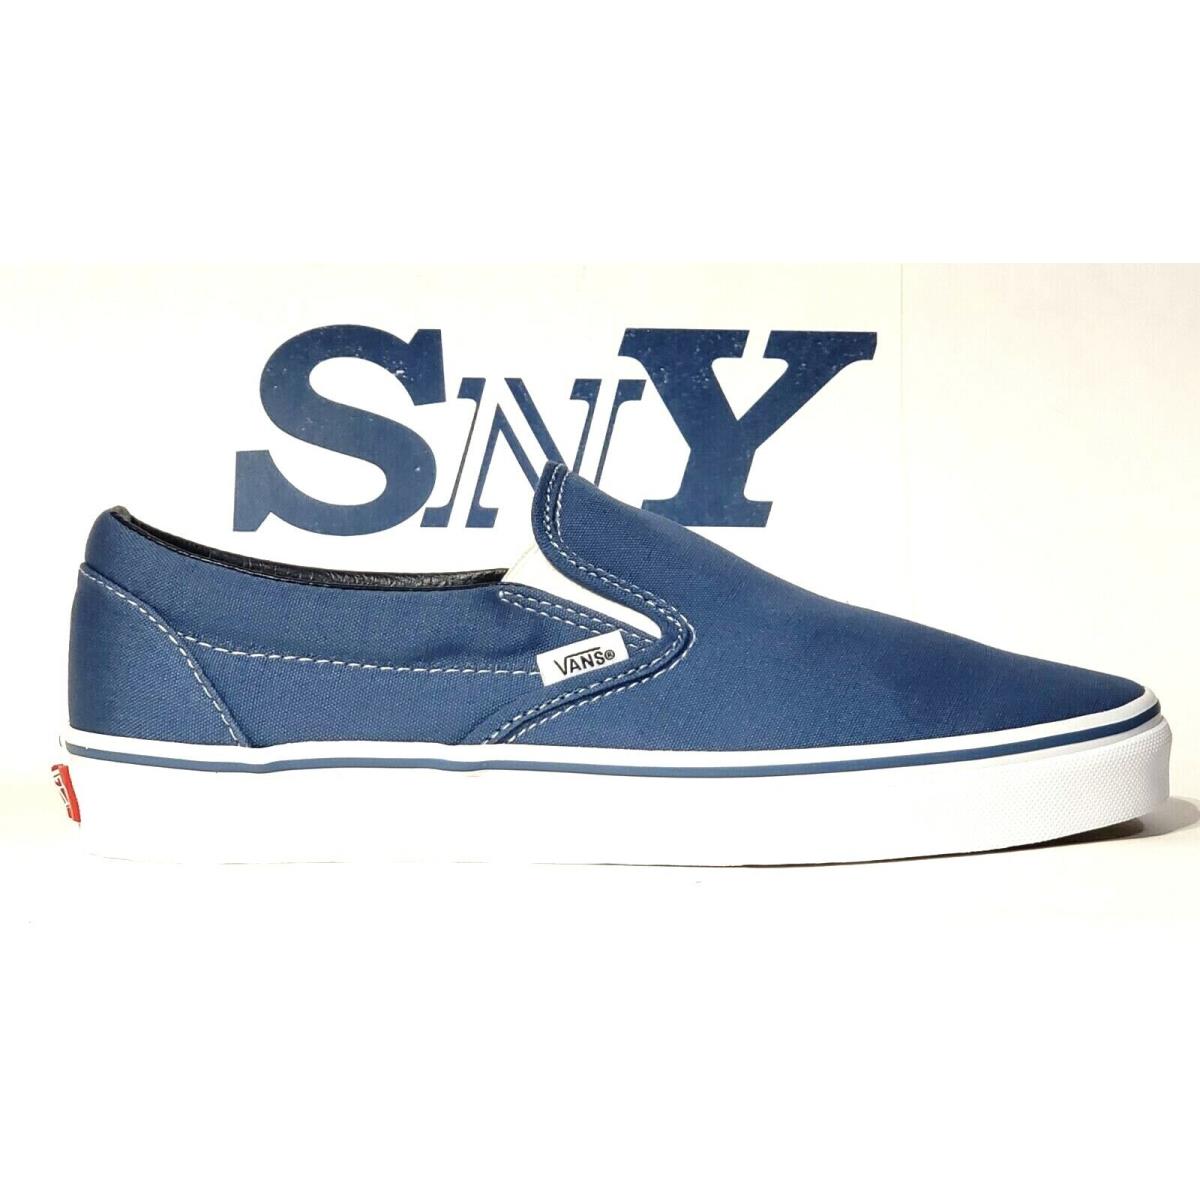 Vans Classic Slip-on Athletic Men`s Shoes Breathable Canvas Upper Rubber Outsole NAVY